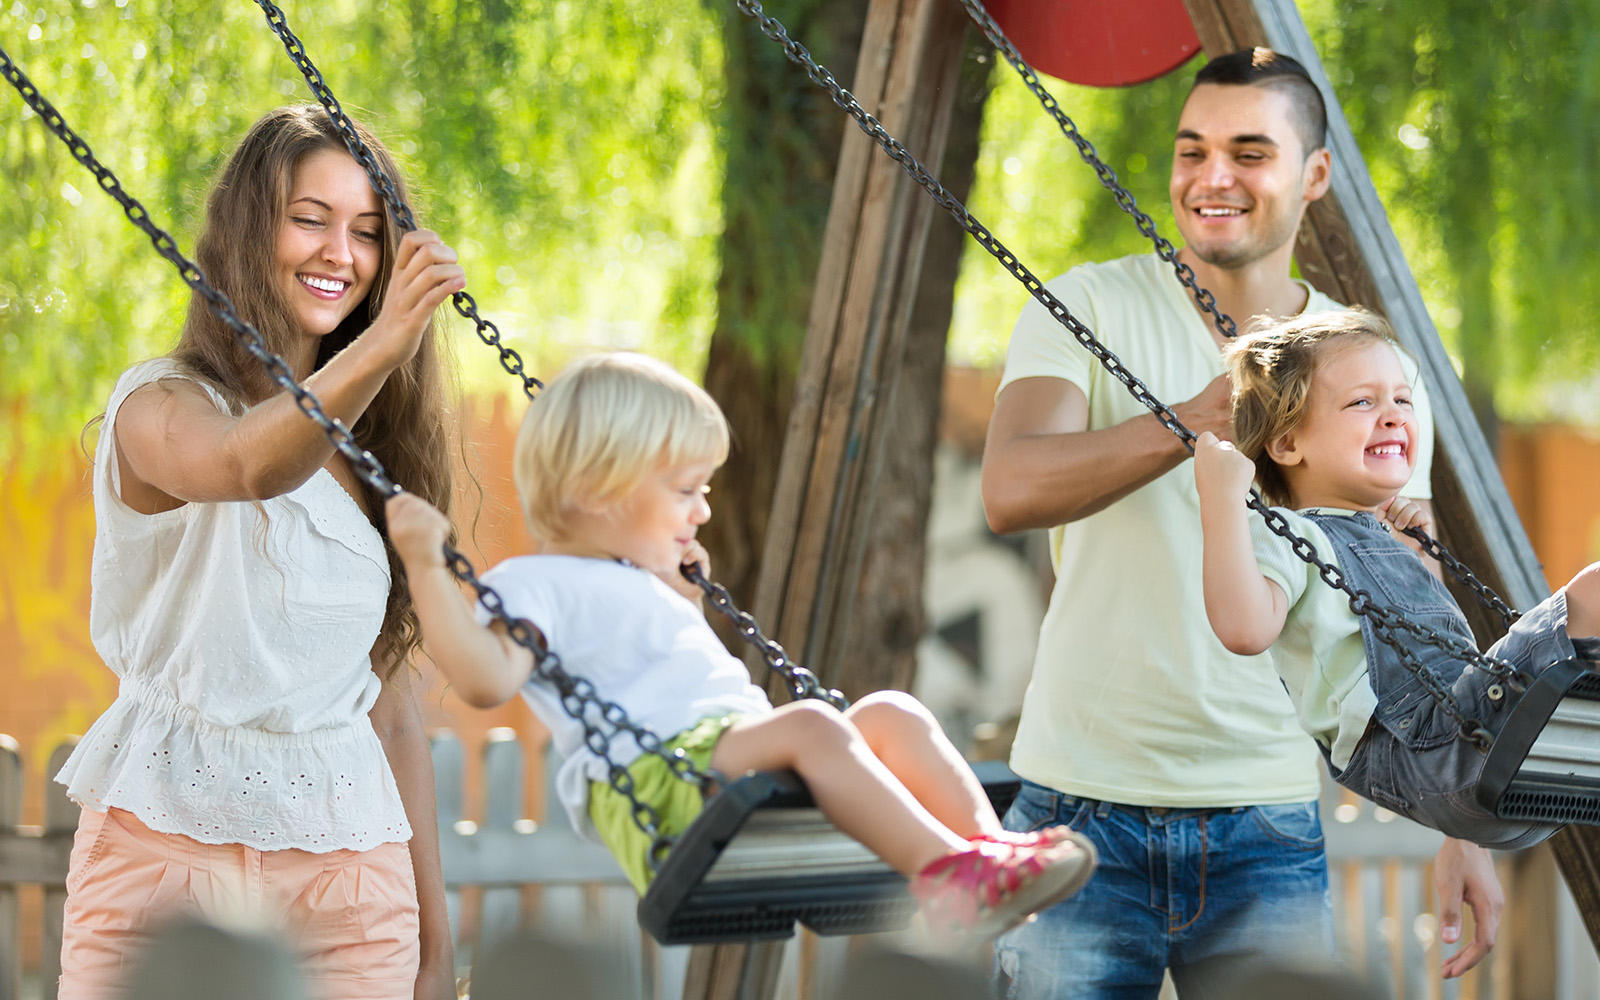 Happy young joyful family of four at playground swings